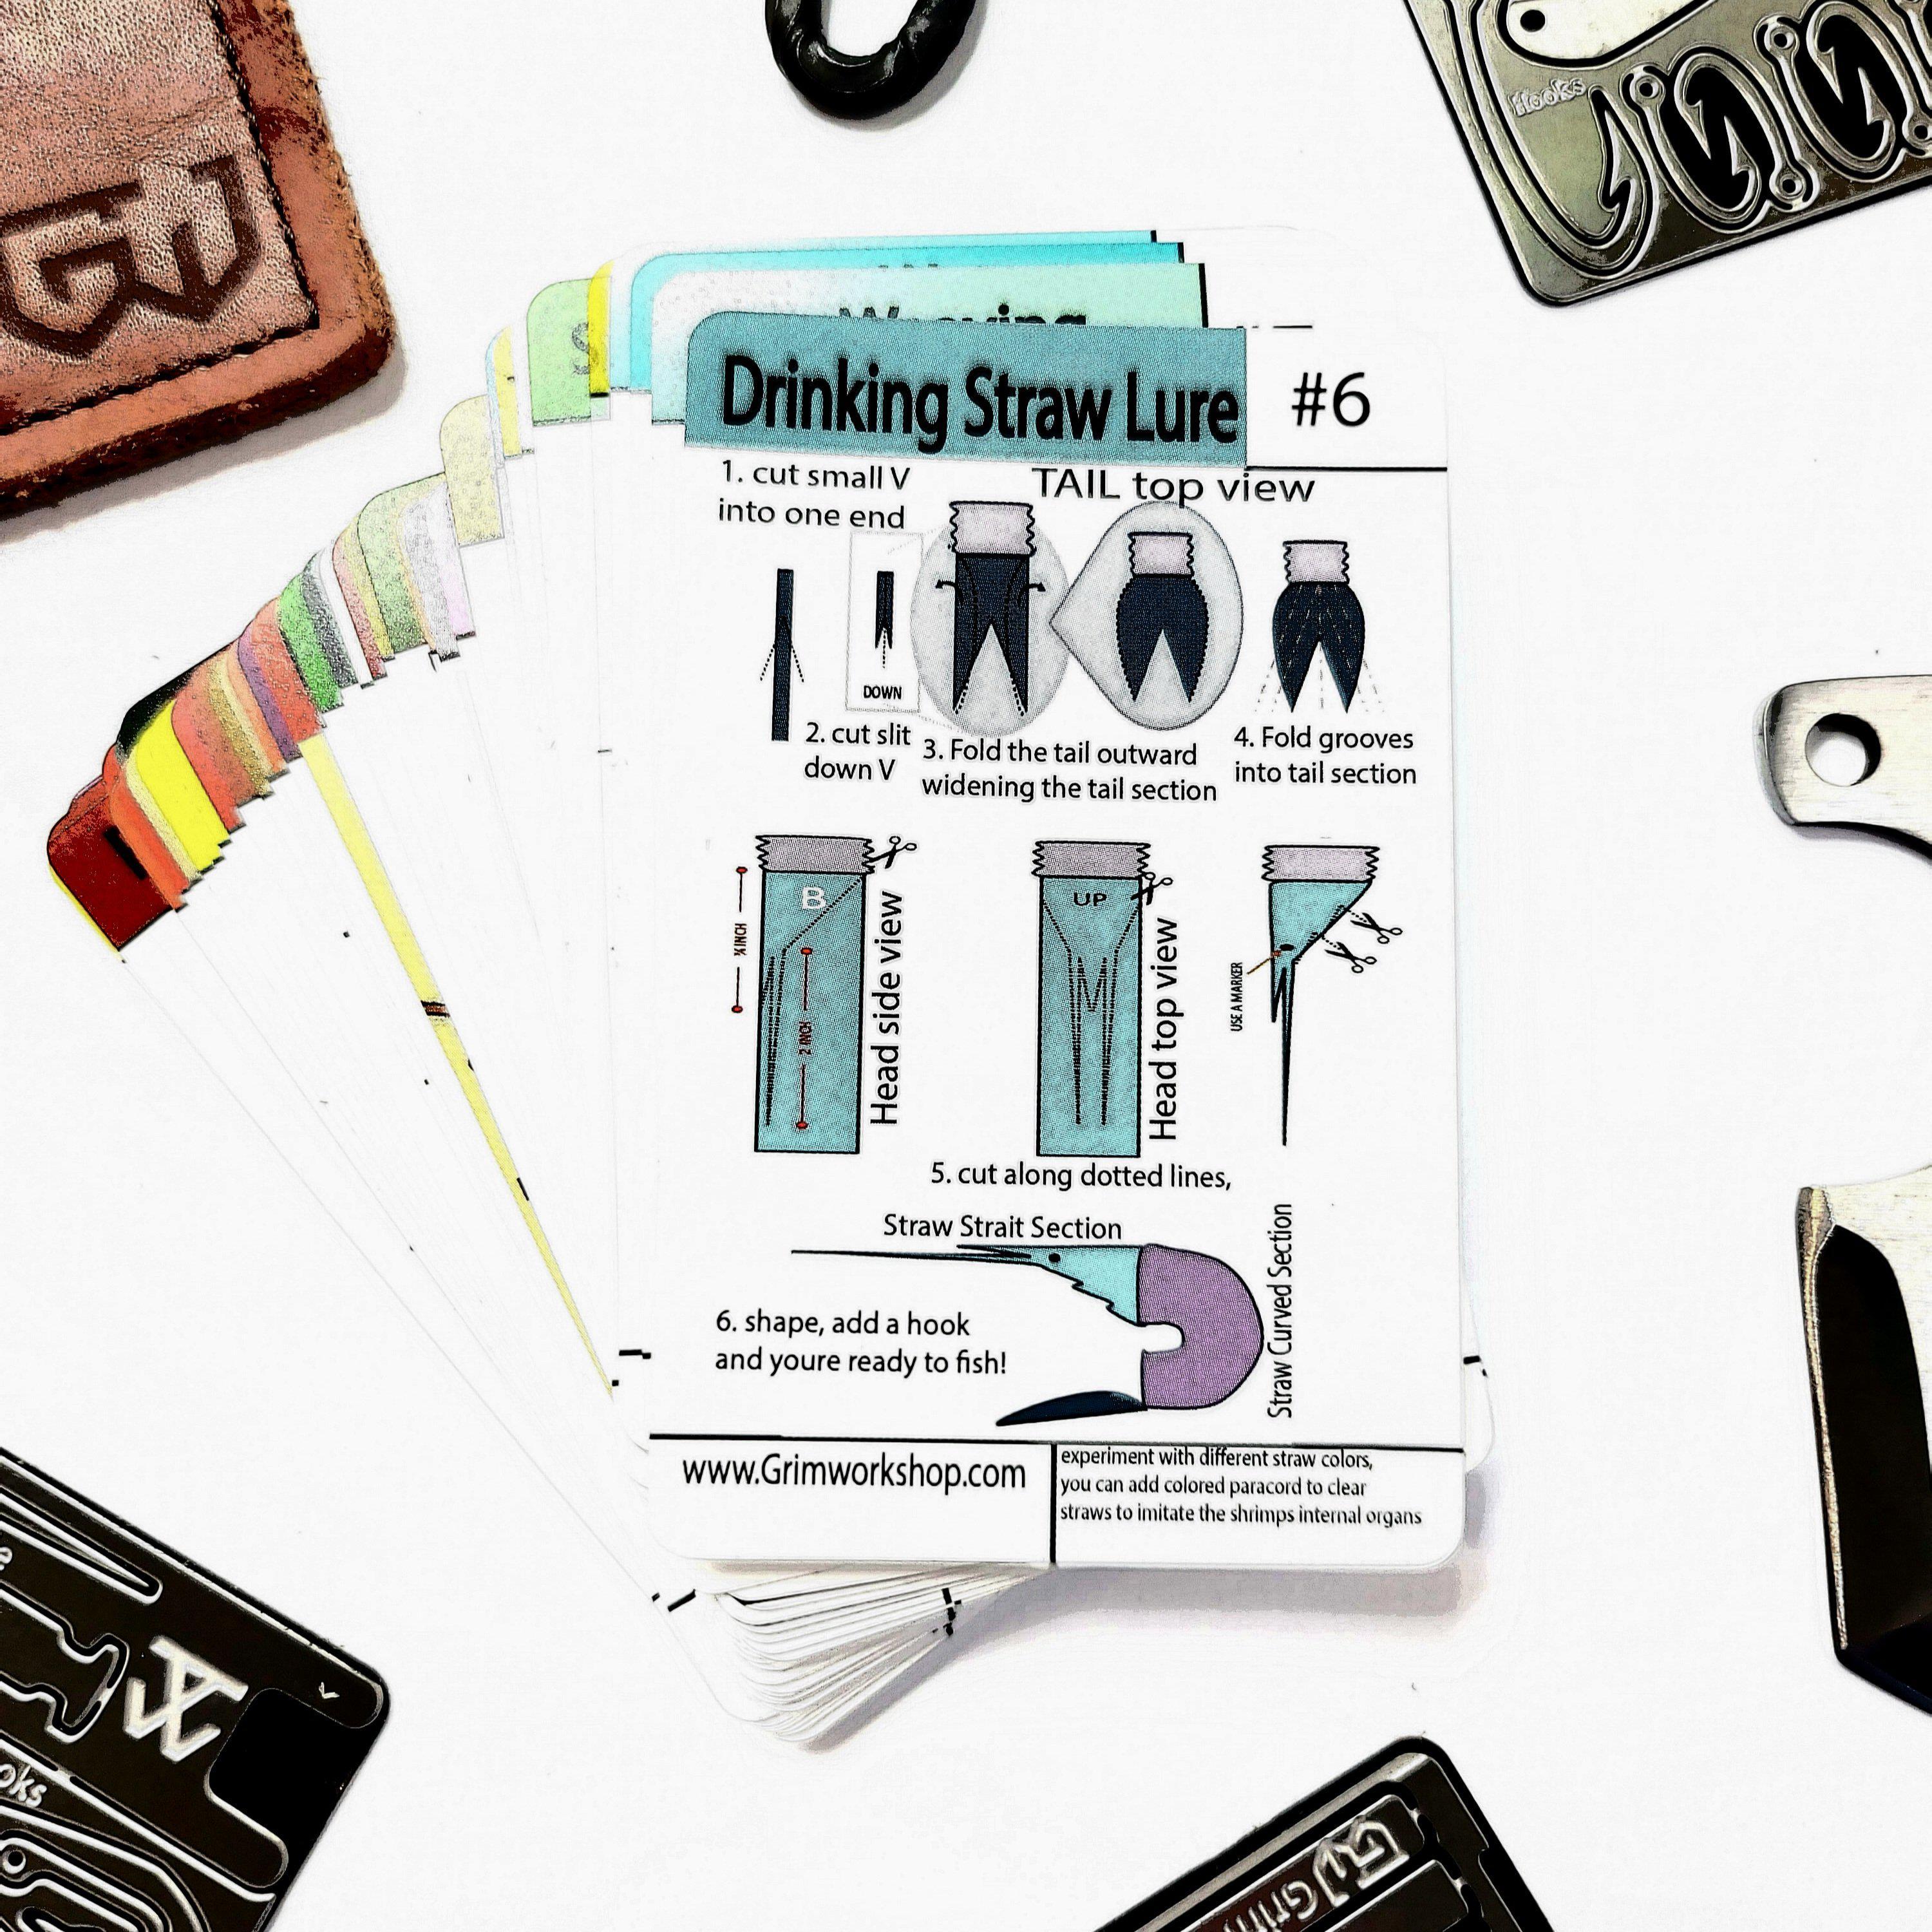 https://grimworkshop.com/cdn/shop/products/6-fishing-drinking-straw-lure-and-jug-line-fishing-tip-card-tip-card-grimworkshop-bugoutbag-bushcraft-edc-gear-edctool-everydaycarry-survivalcard-survivalkit-wilderness-prepping-toolkit-2.jpg?w=600